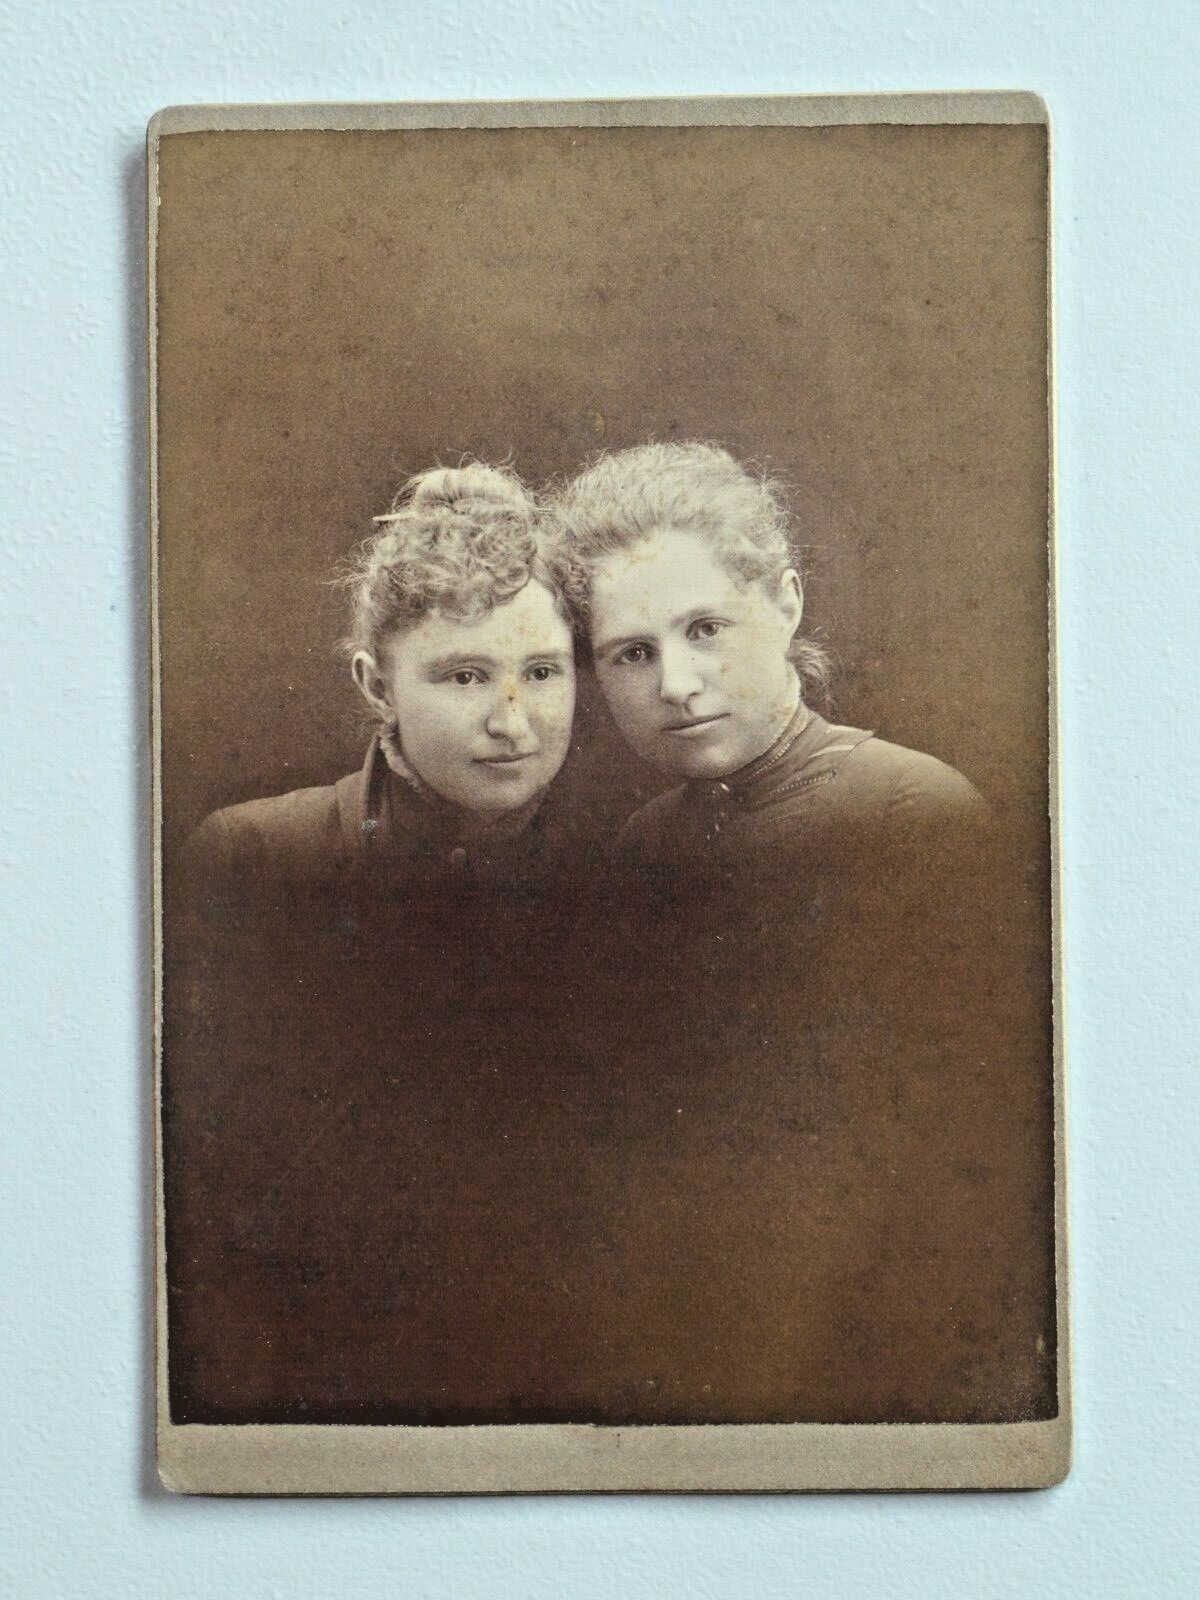 Antique Cabinet Photo Card Young Women Sisters? by E.S. Hall 1888 Hoopeston, IL